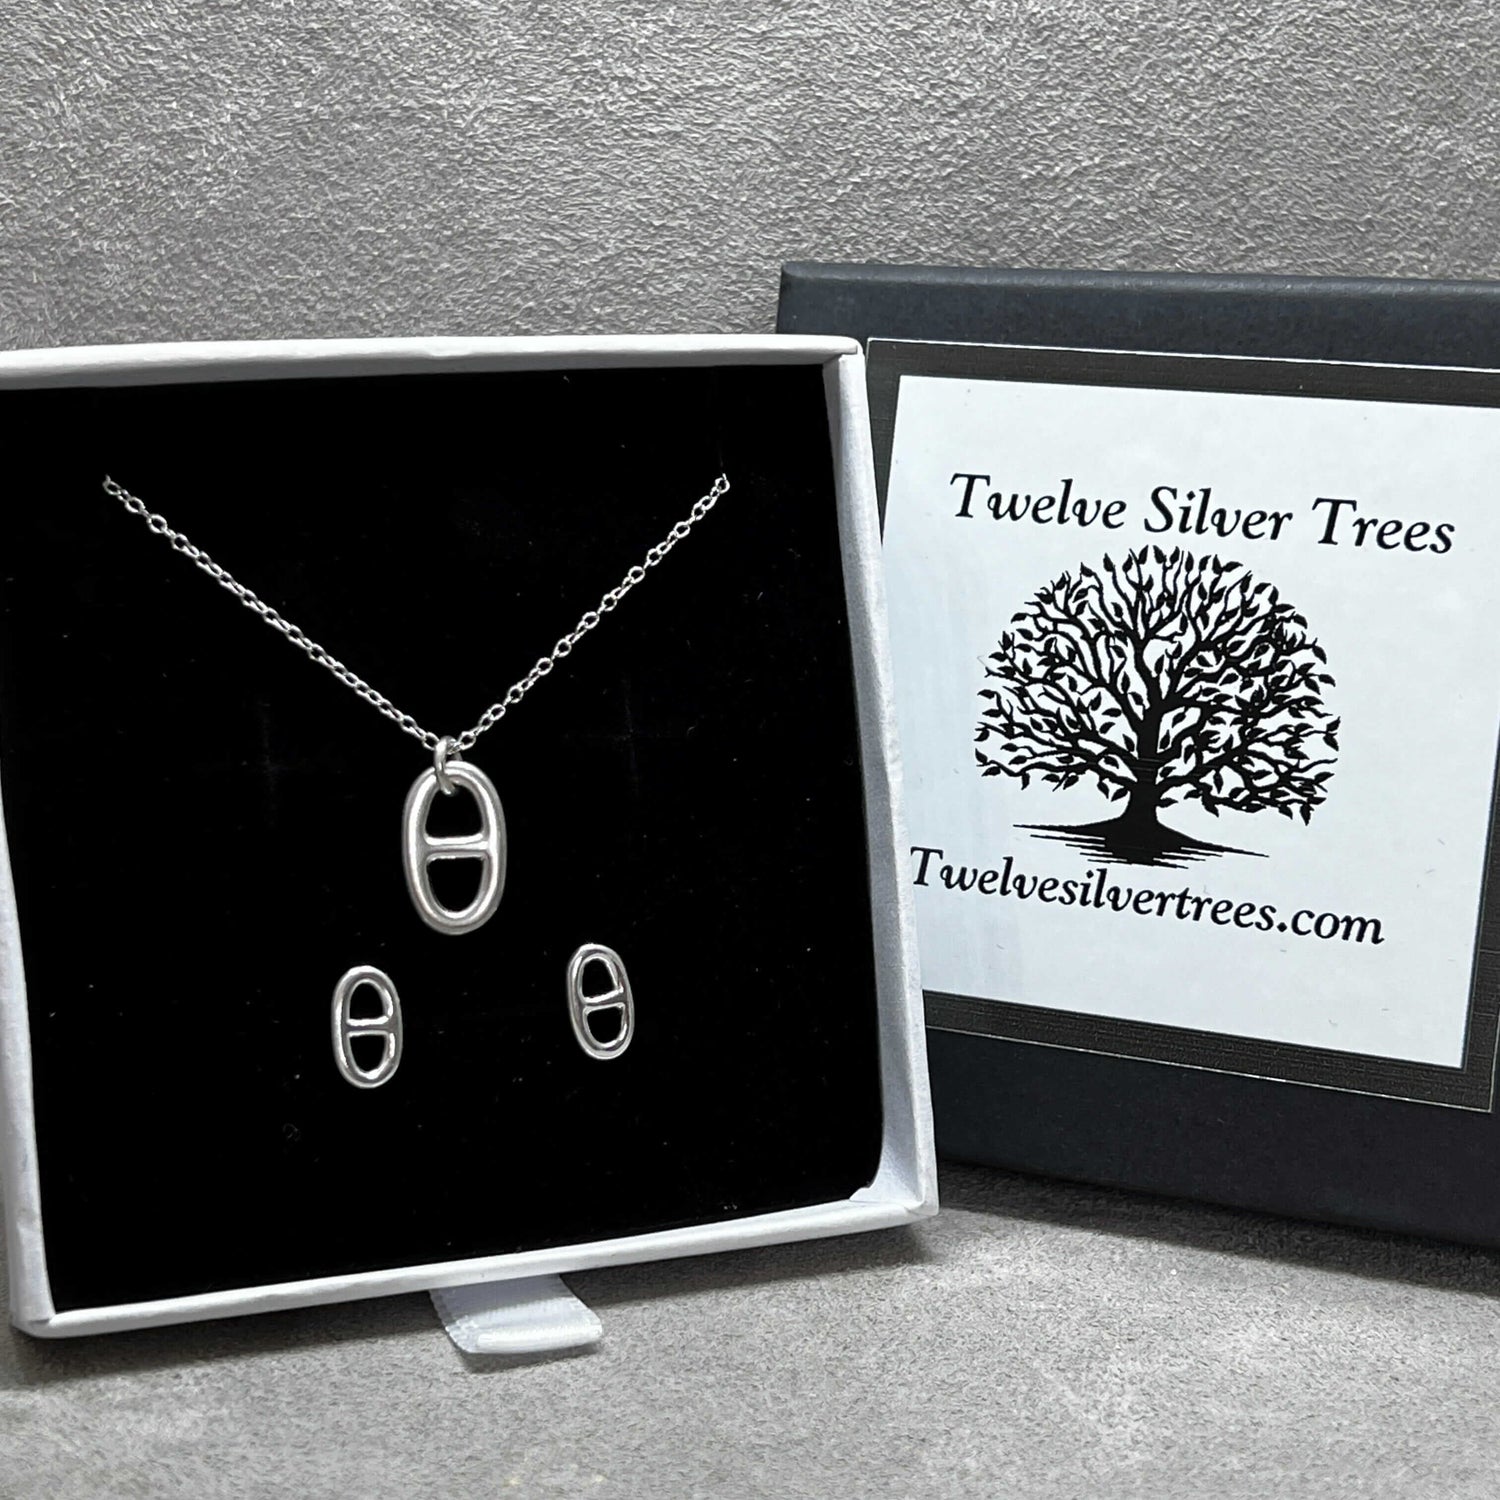 Special Offers & 925 sterling silver jewellery collections at Twelve Silver Trees Jewellery & Gifts